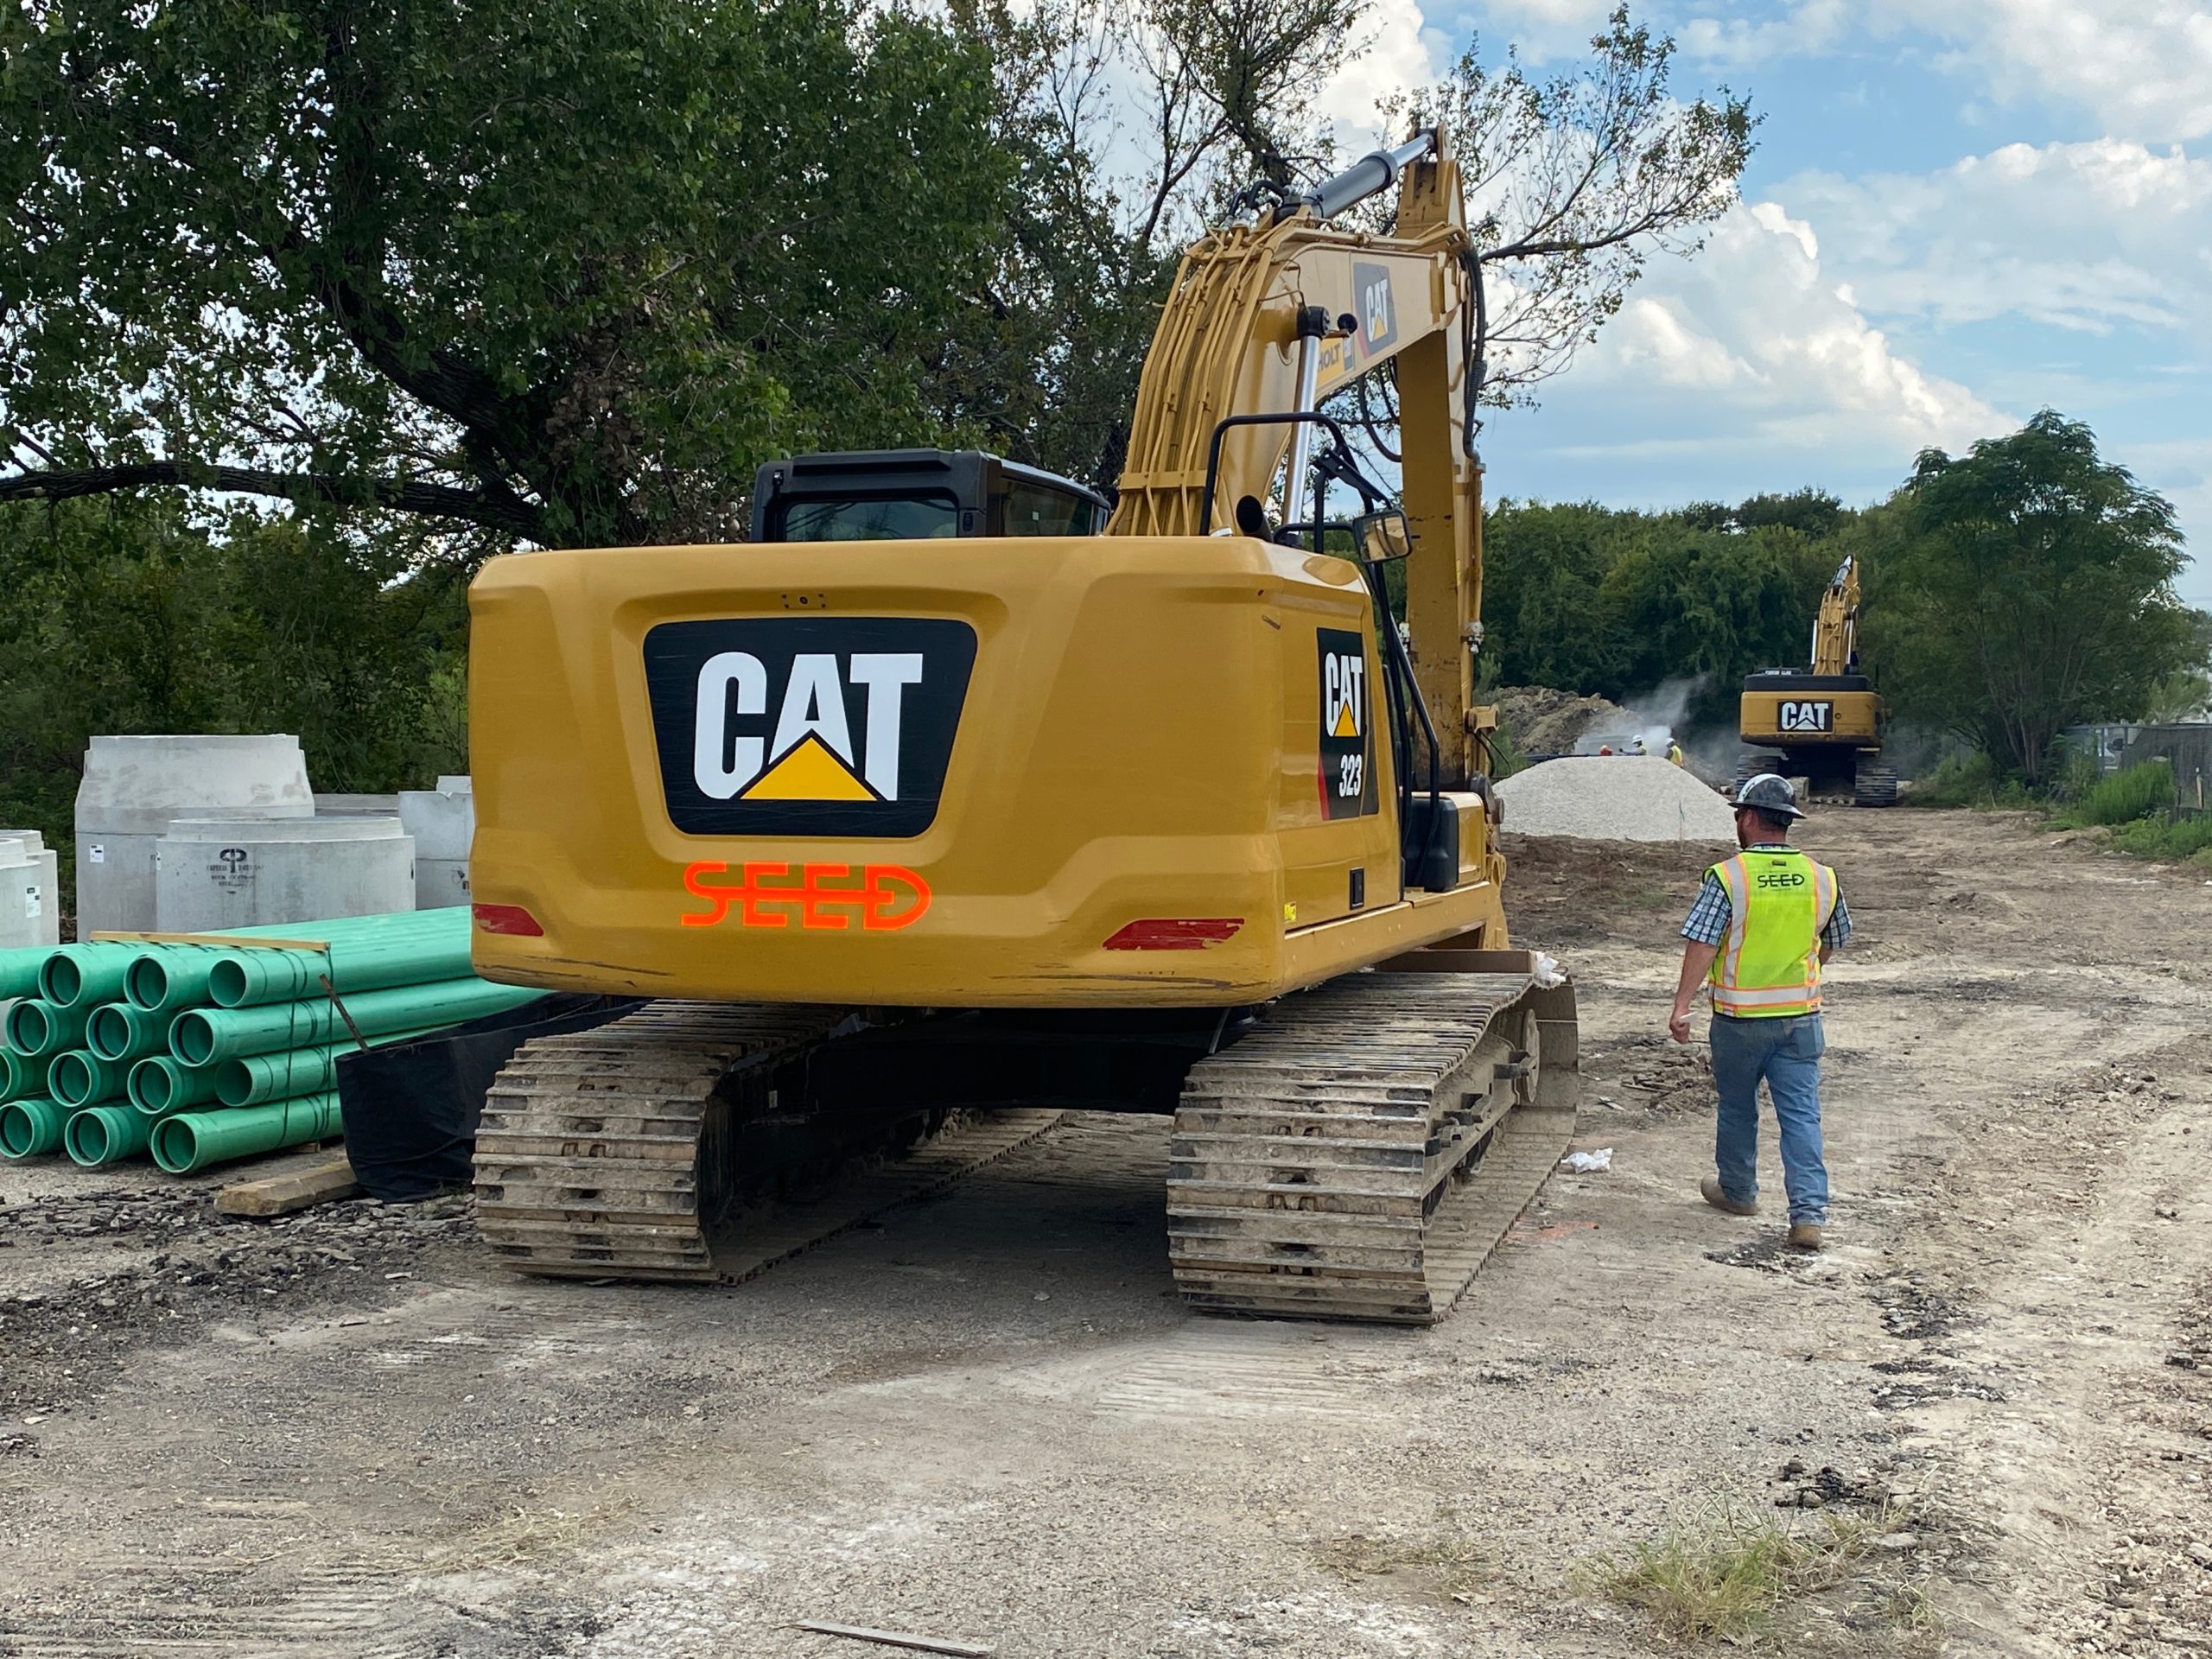 Back end shot of a CAT excavator with seed logo.